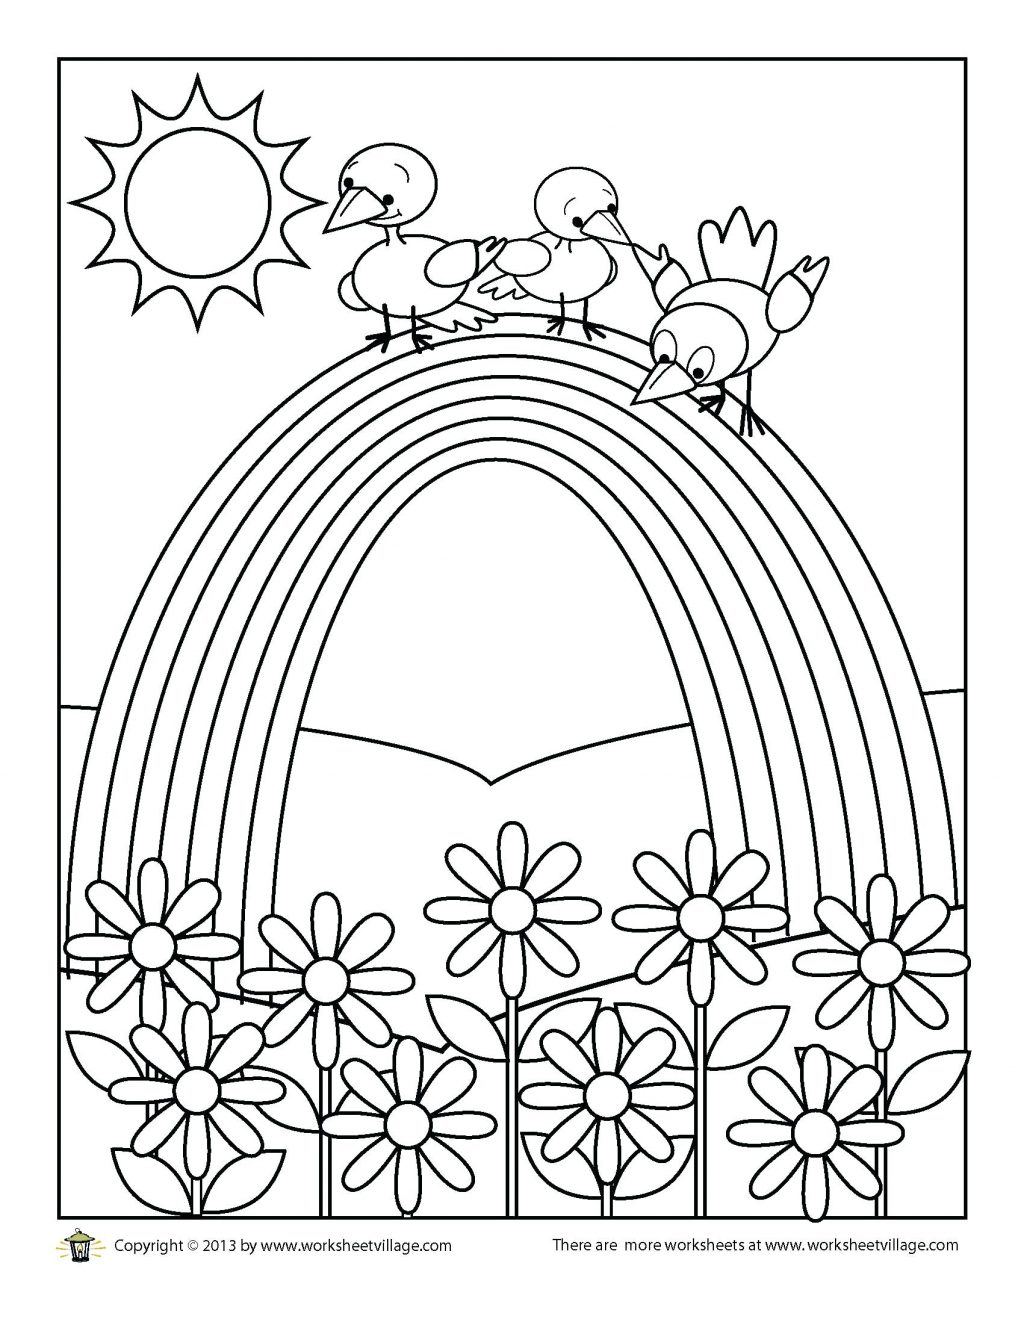 Rainbow Coloring Pages For Adults at GetColorings.com | Free printable ...